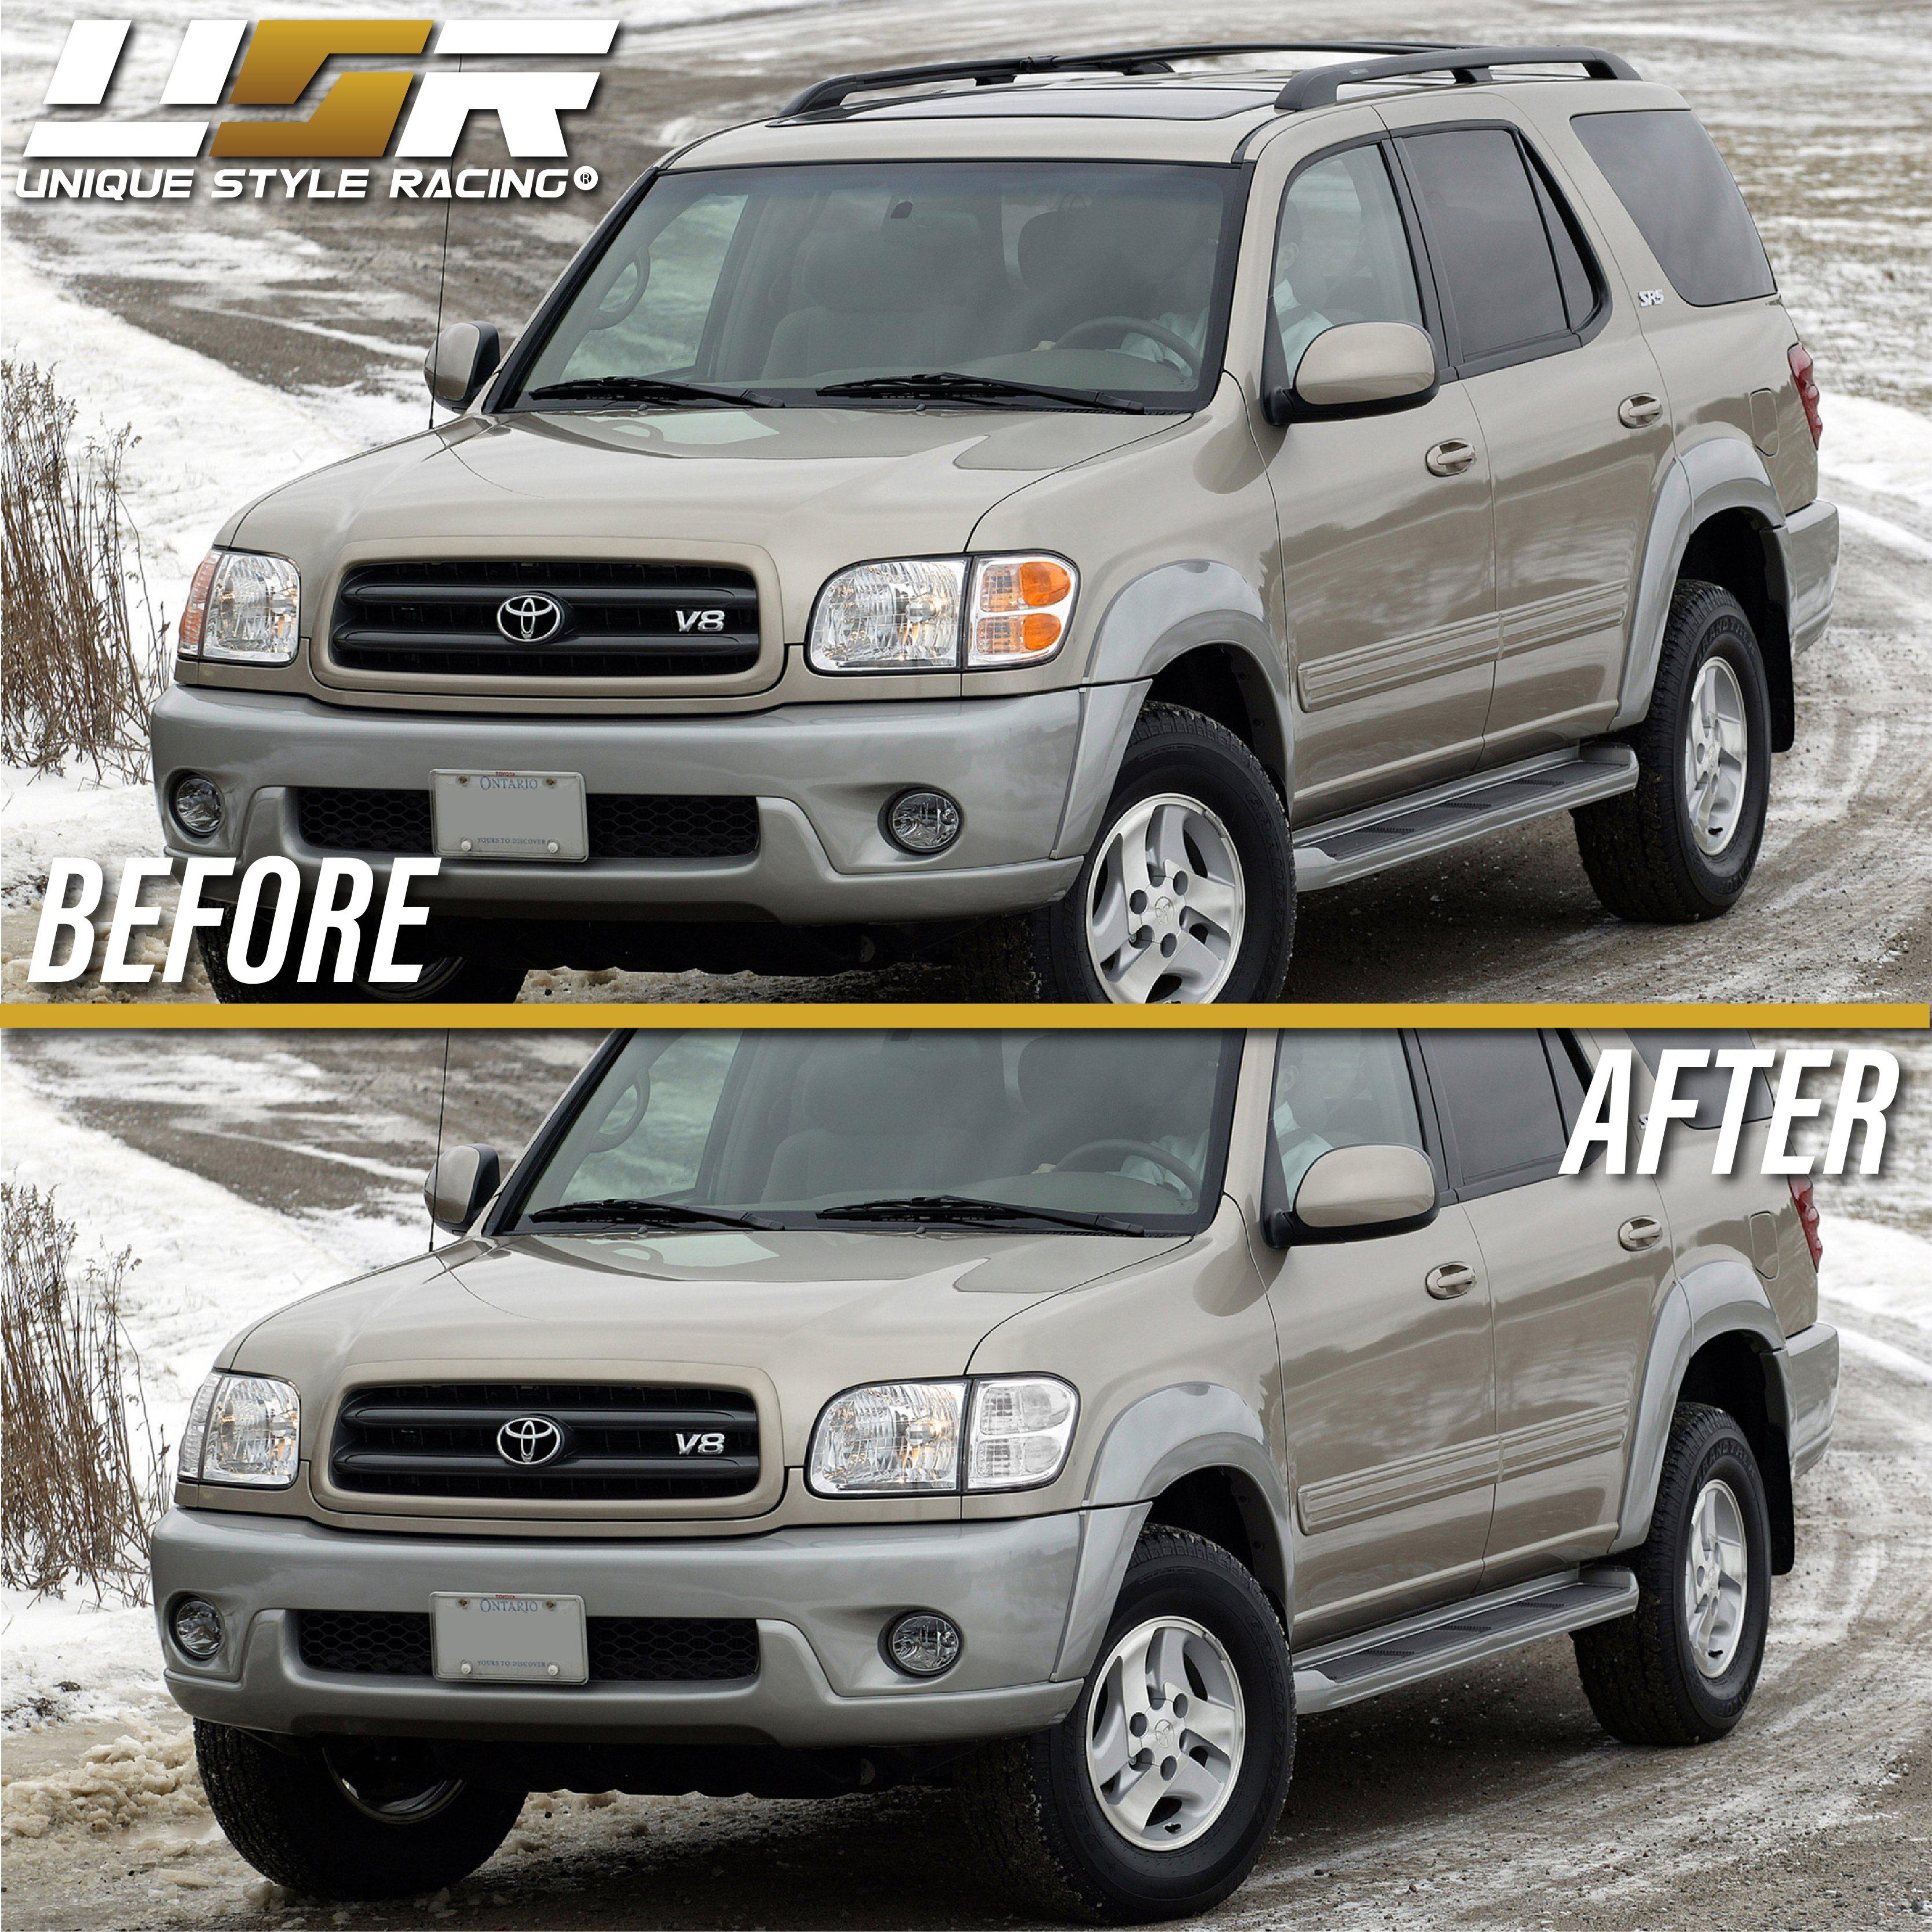 2001-2004 Toyota Sequoia / 2000-2004 Toyota Tundra Double Cab Only